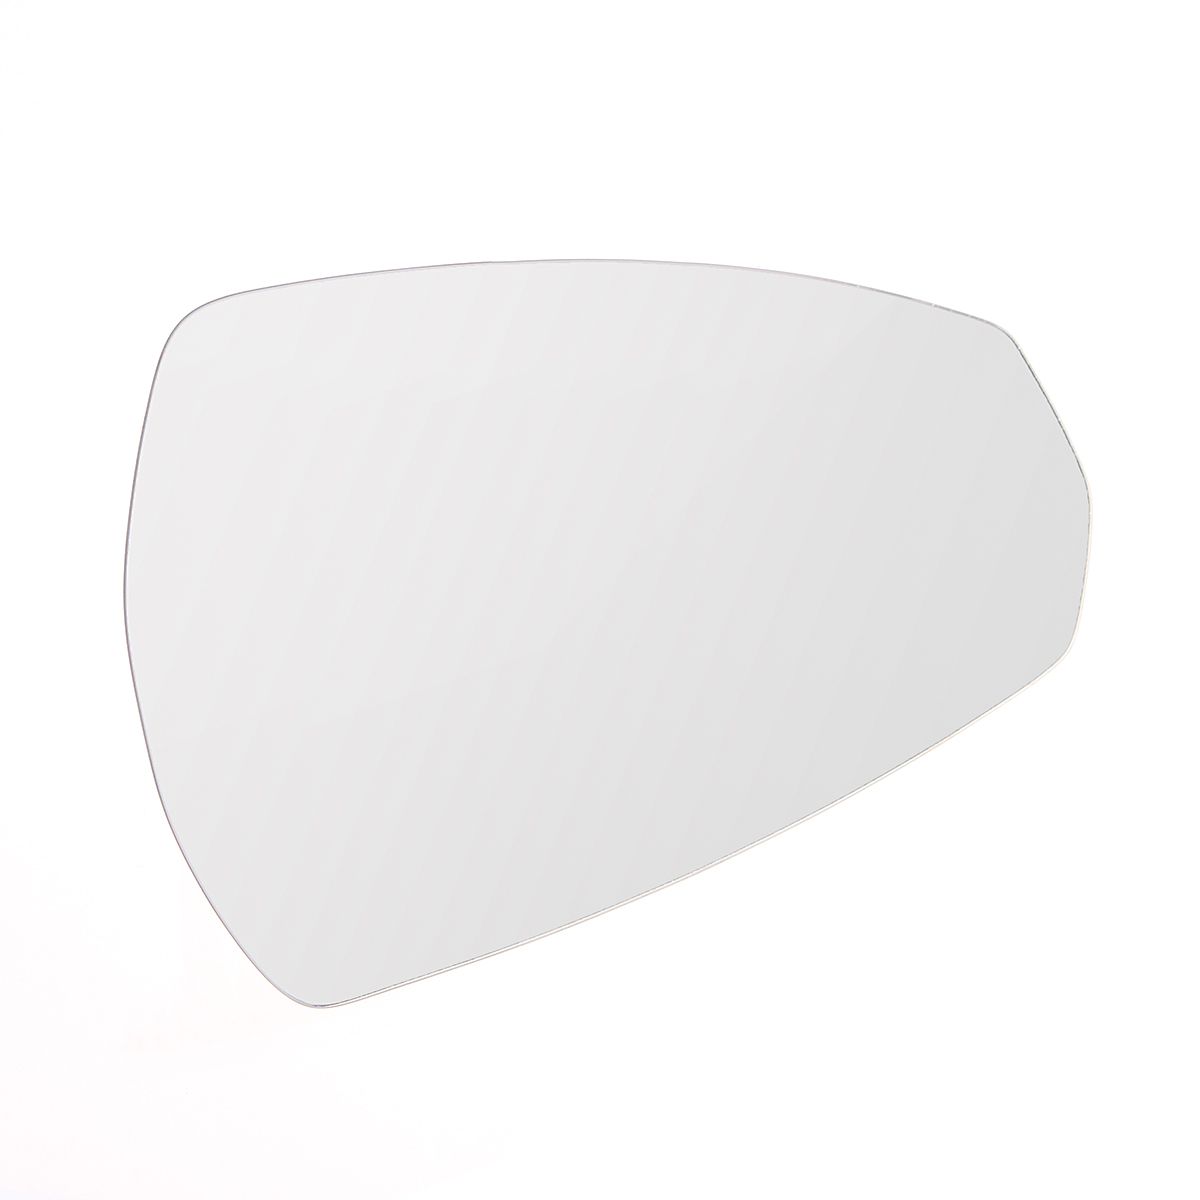 Left-Right-Heated-Rearview-Car-Mirror-Glass-For-Audi-A3-A4-A5-S4-S5-2014-2018-1397584